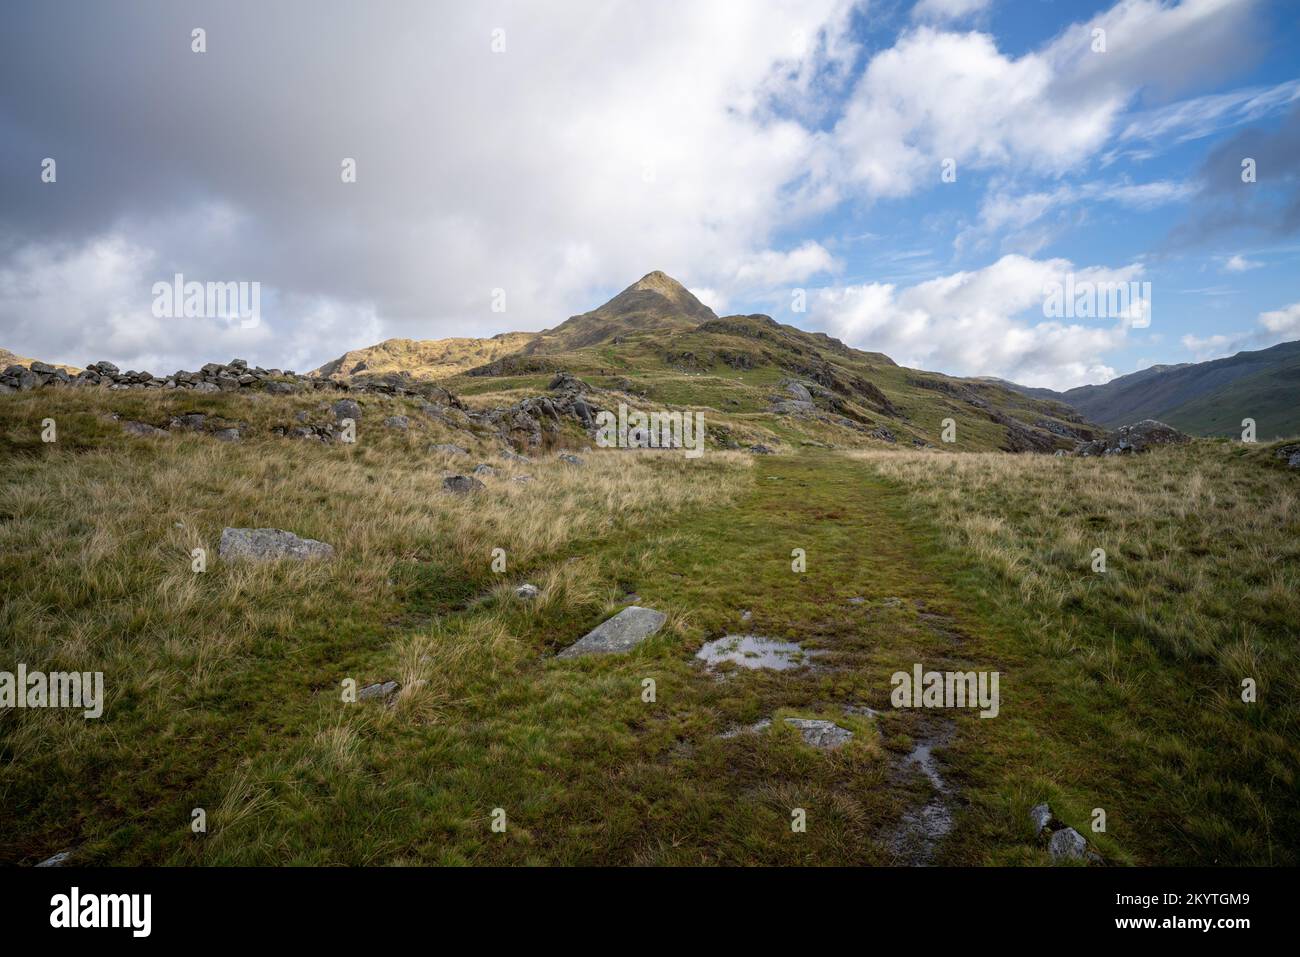 On route climbing Cnicht Mountain in the Snowdonia national park in North Wales, UK, Stock Photo